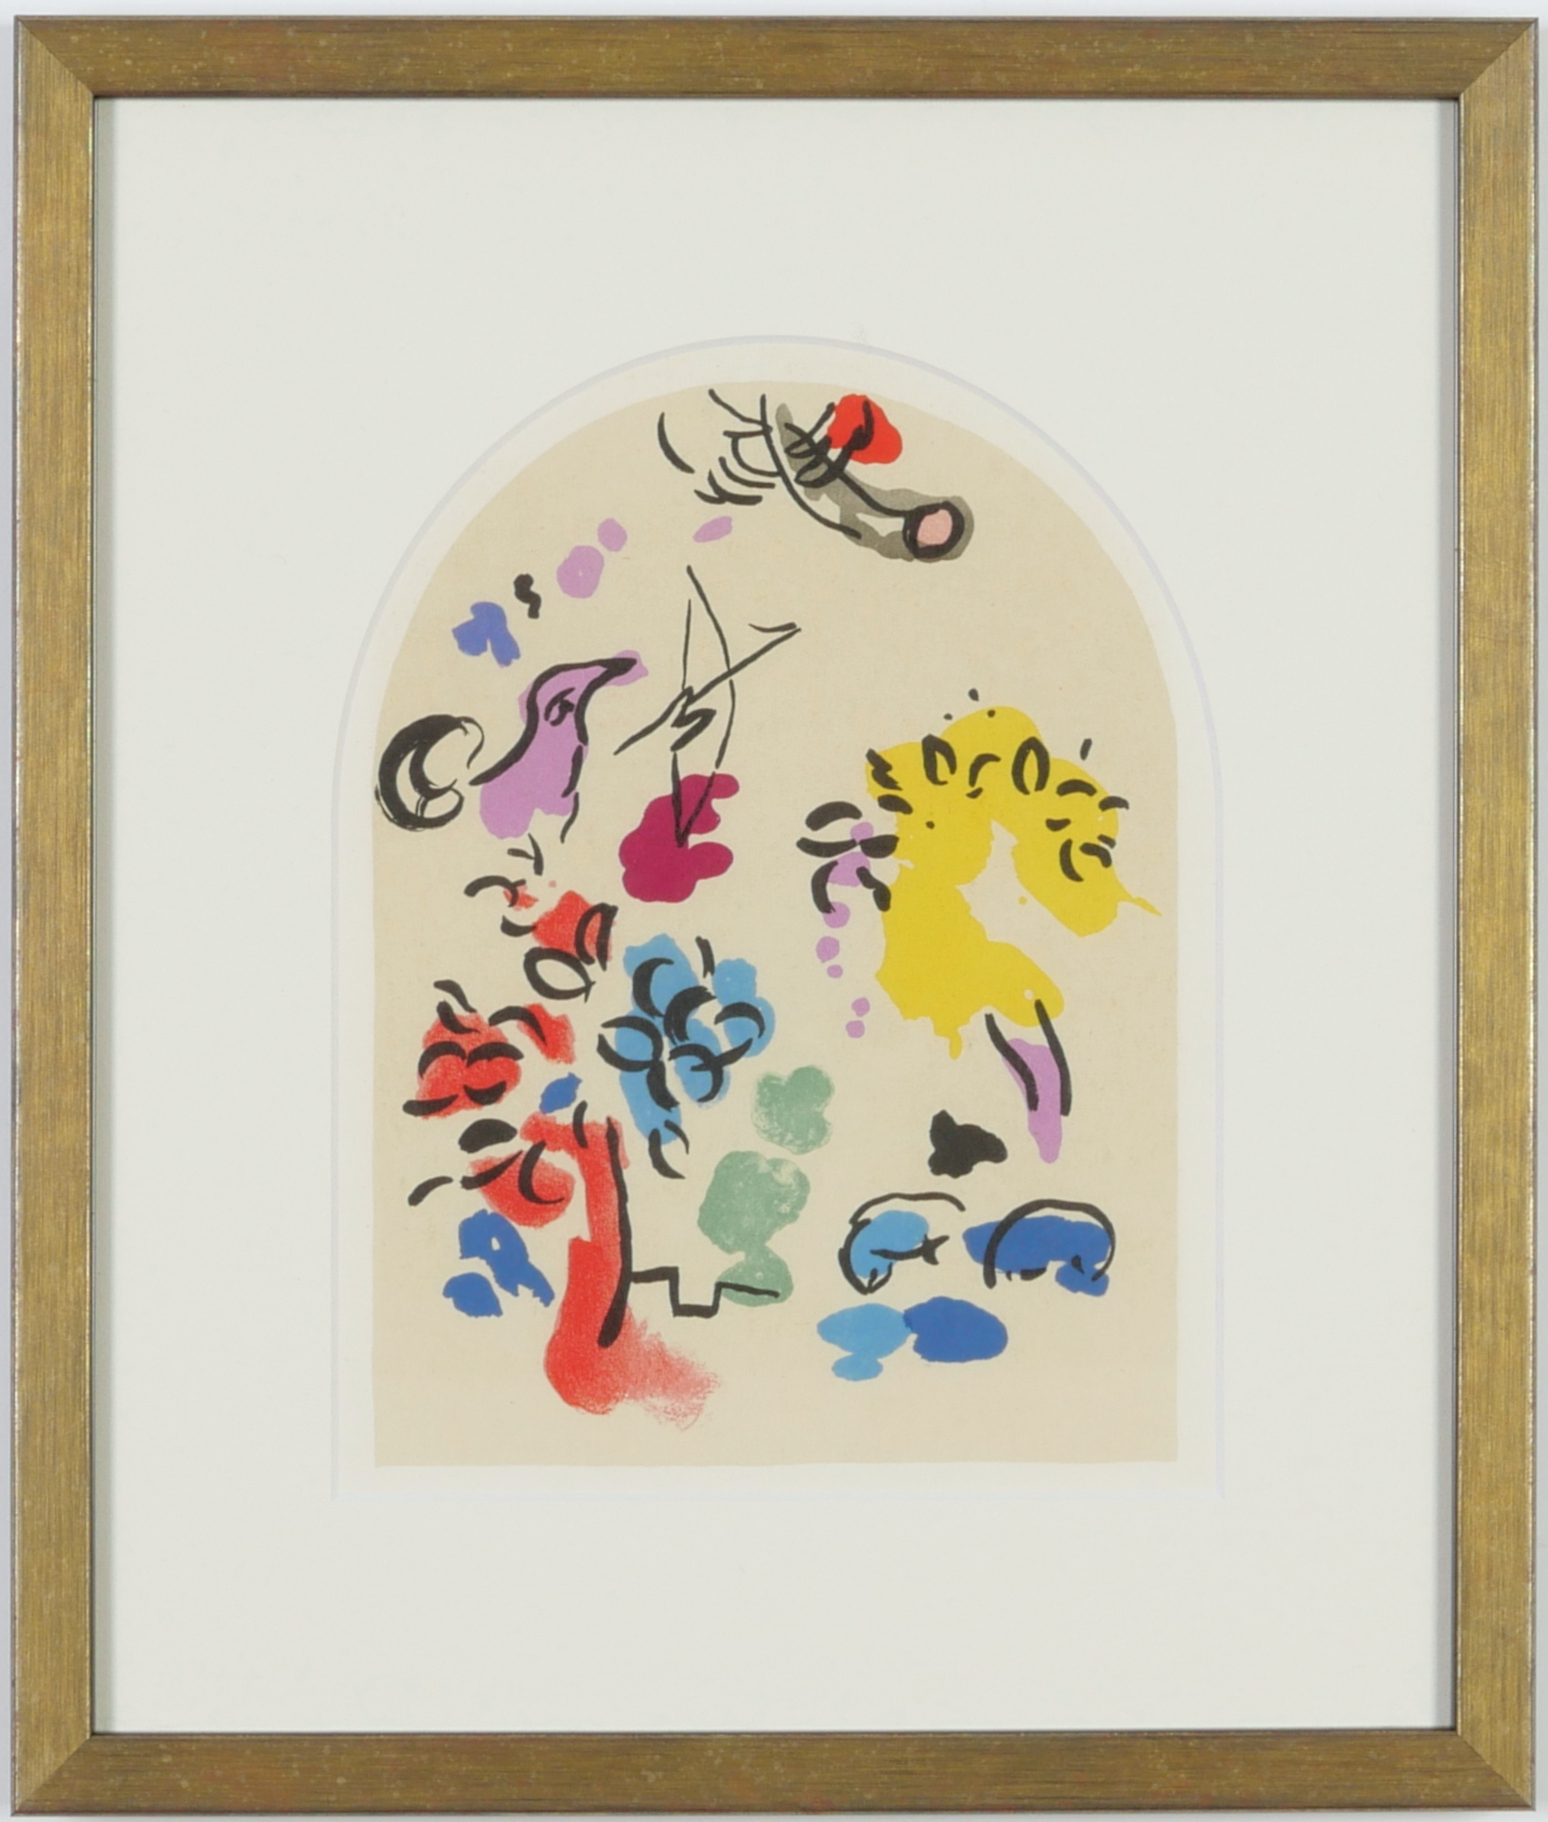 MARC CHAGALL, The Twelve Tribes, twelve lithographs in colour, printed in Paris by Mourlot 1962, - Image 6 of 13